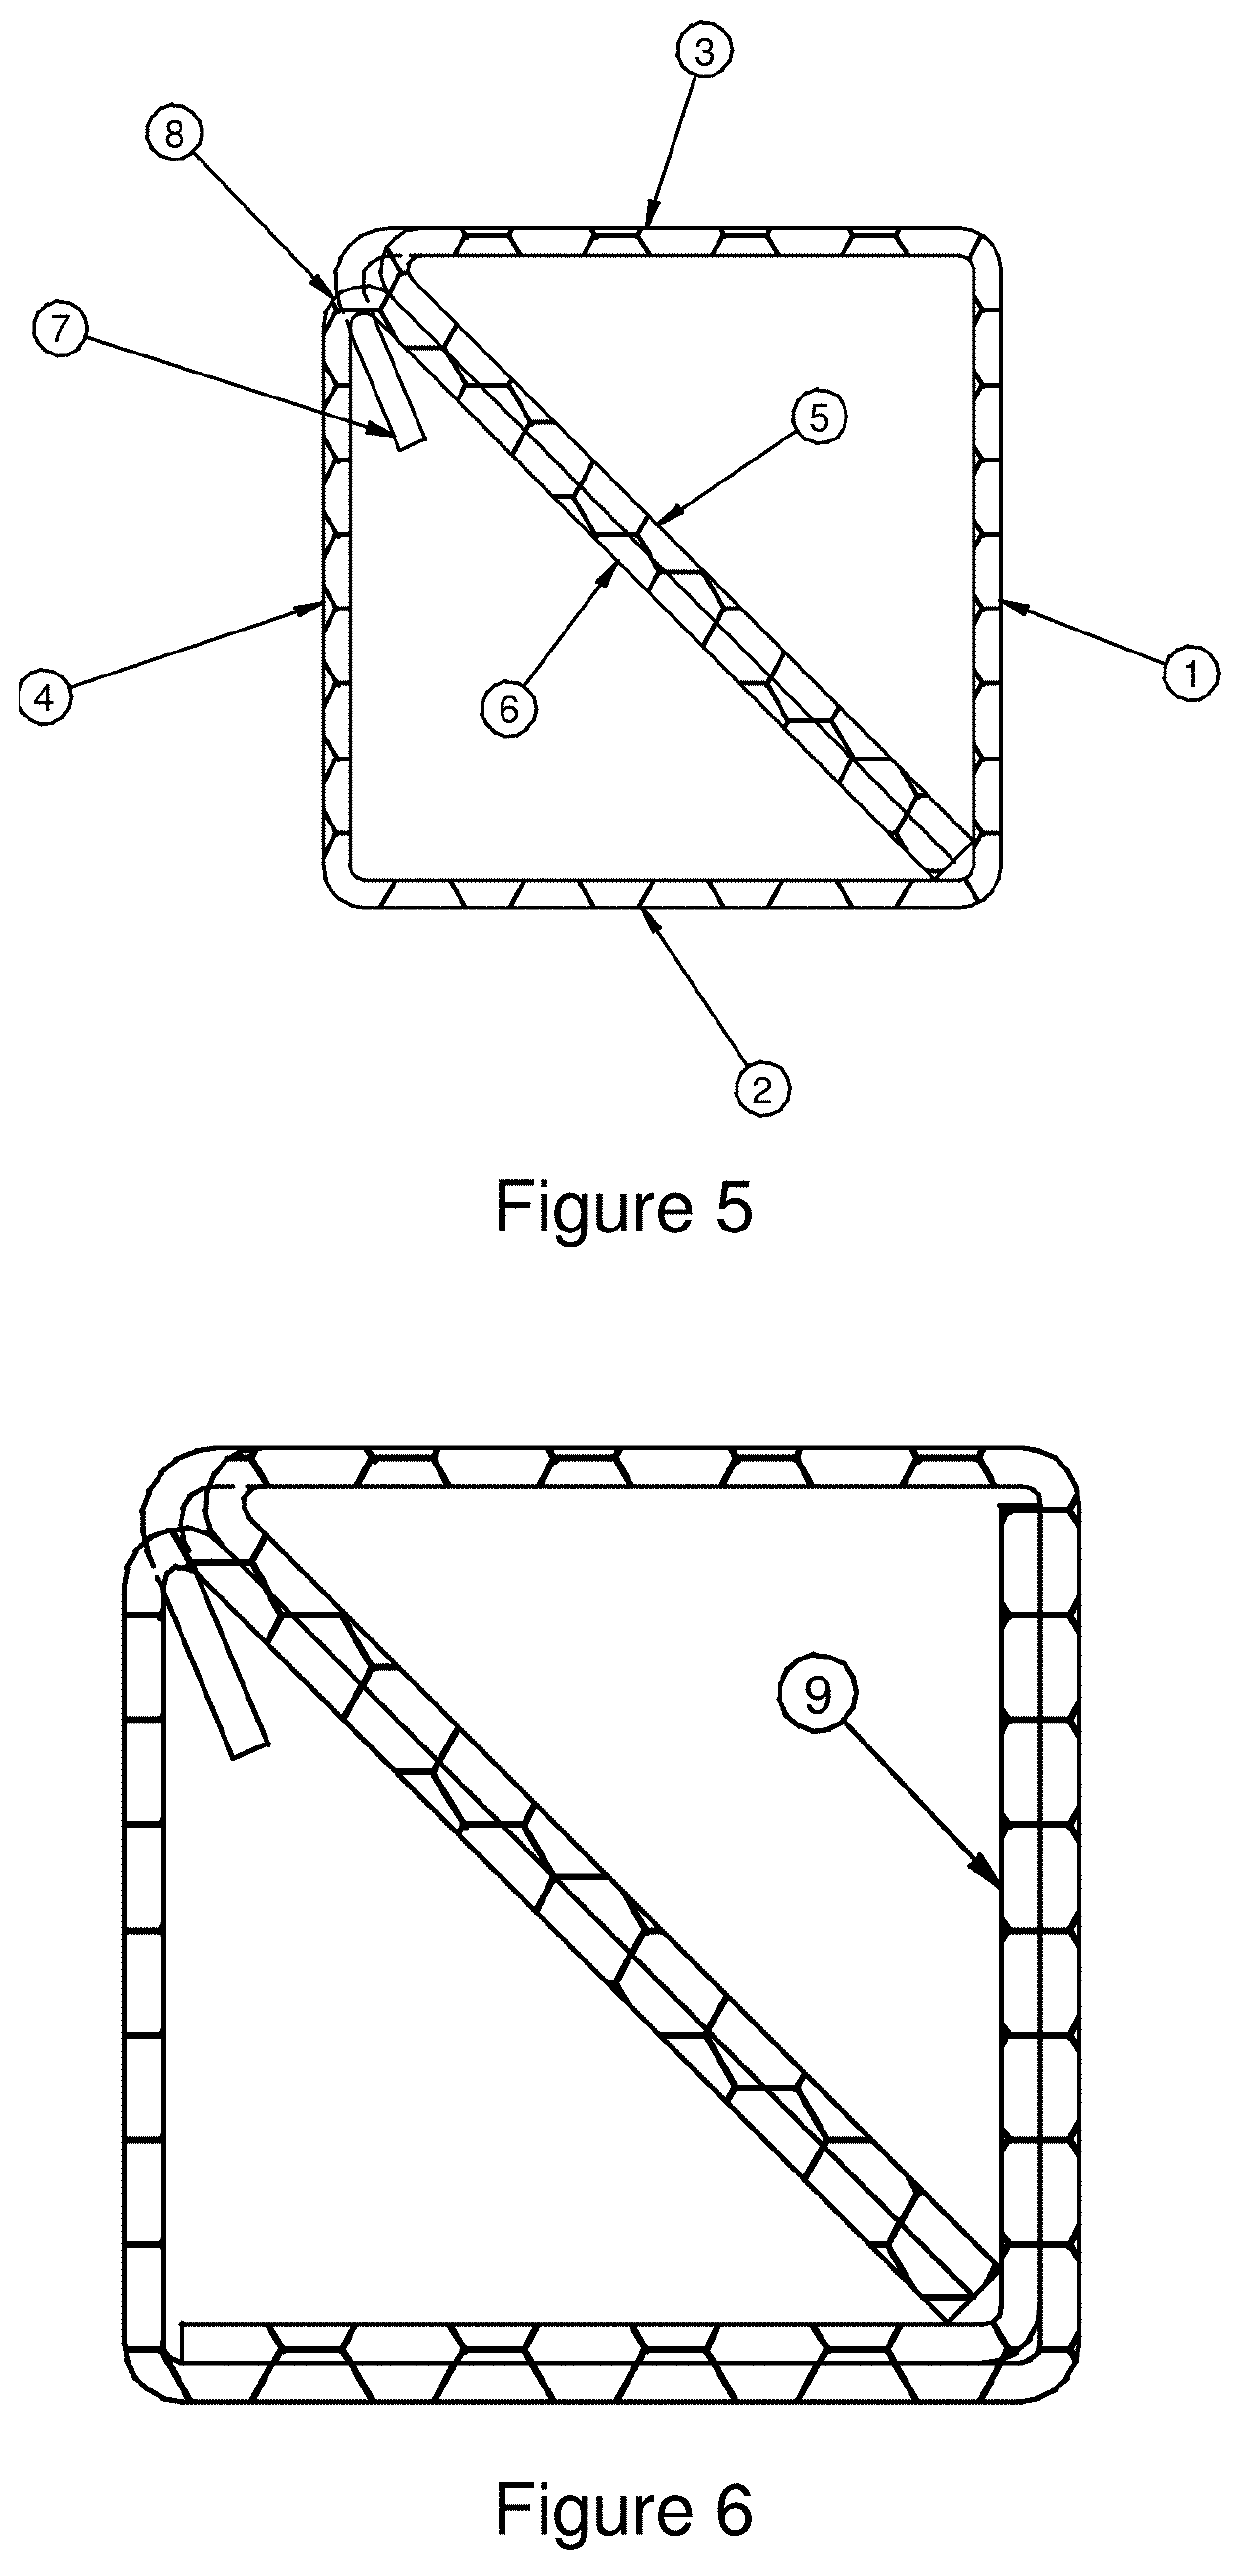 Tubular structural profile and construction system, produced by cutting and folding a semi-rigid and foldable sheet, with 4 substantially orthoginal layers joined at fold lines and internal diagonal layers joining two opposing fold lines, and at least one tongue which coincides with at least one slot